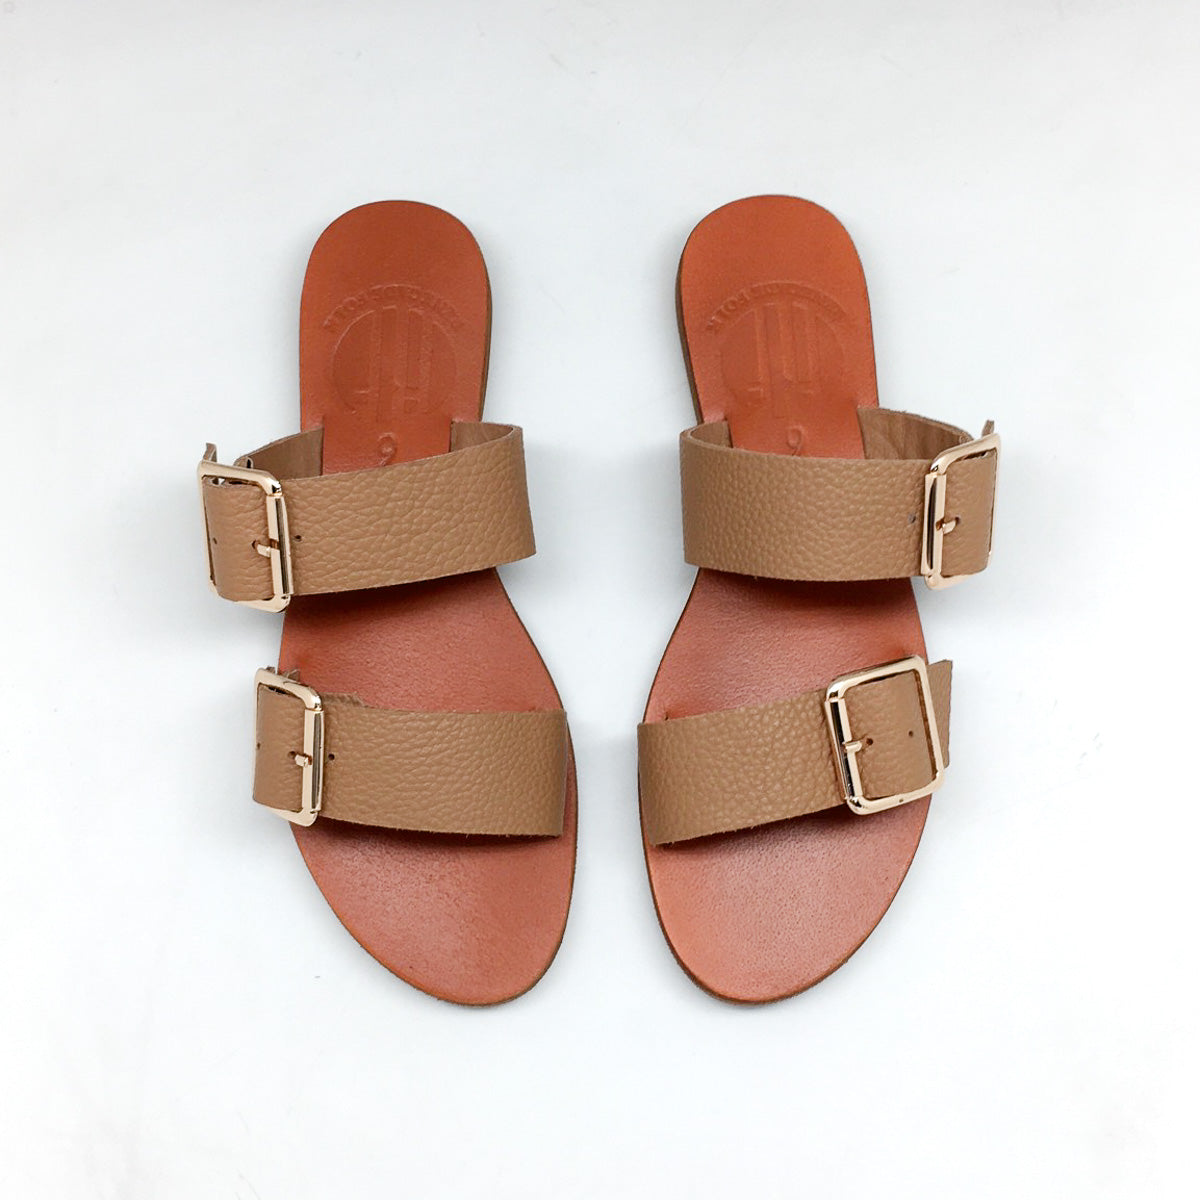 Stay Sandals